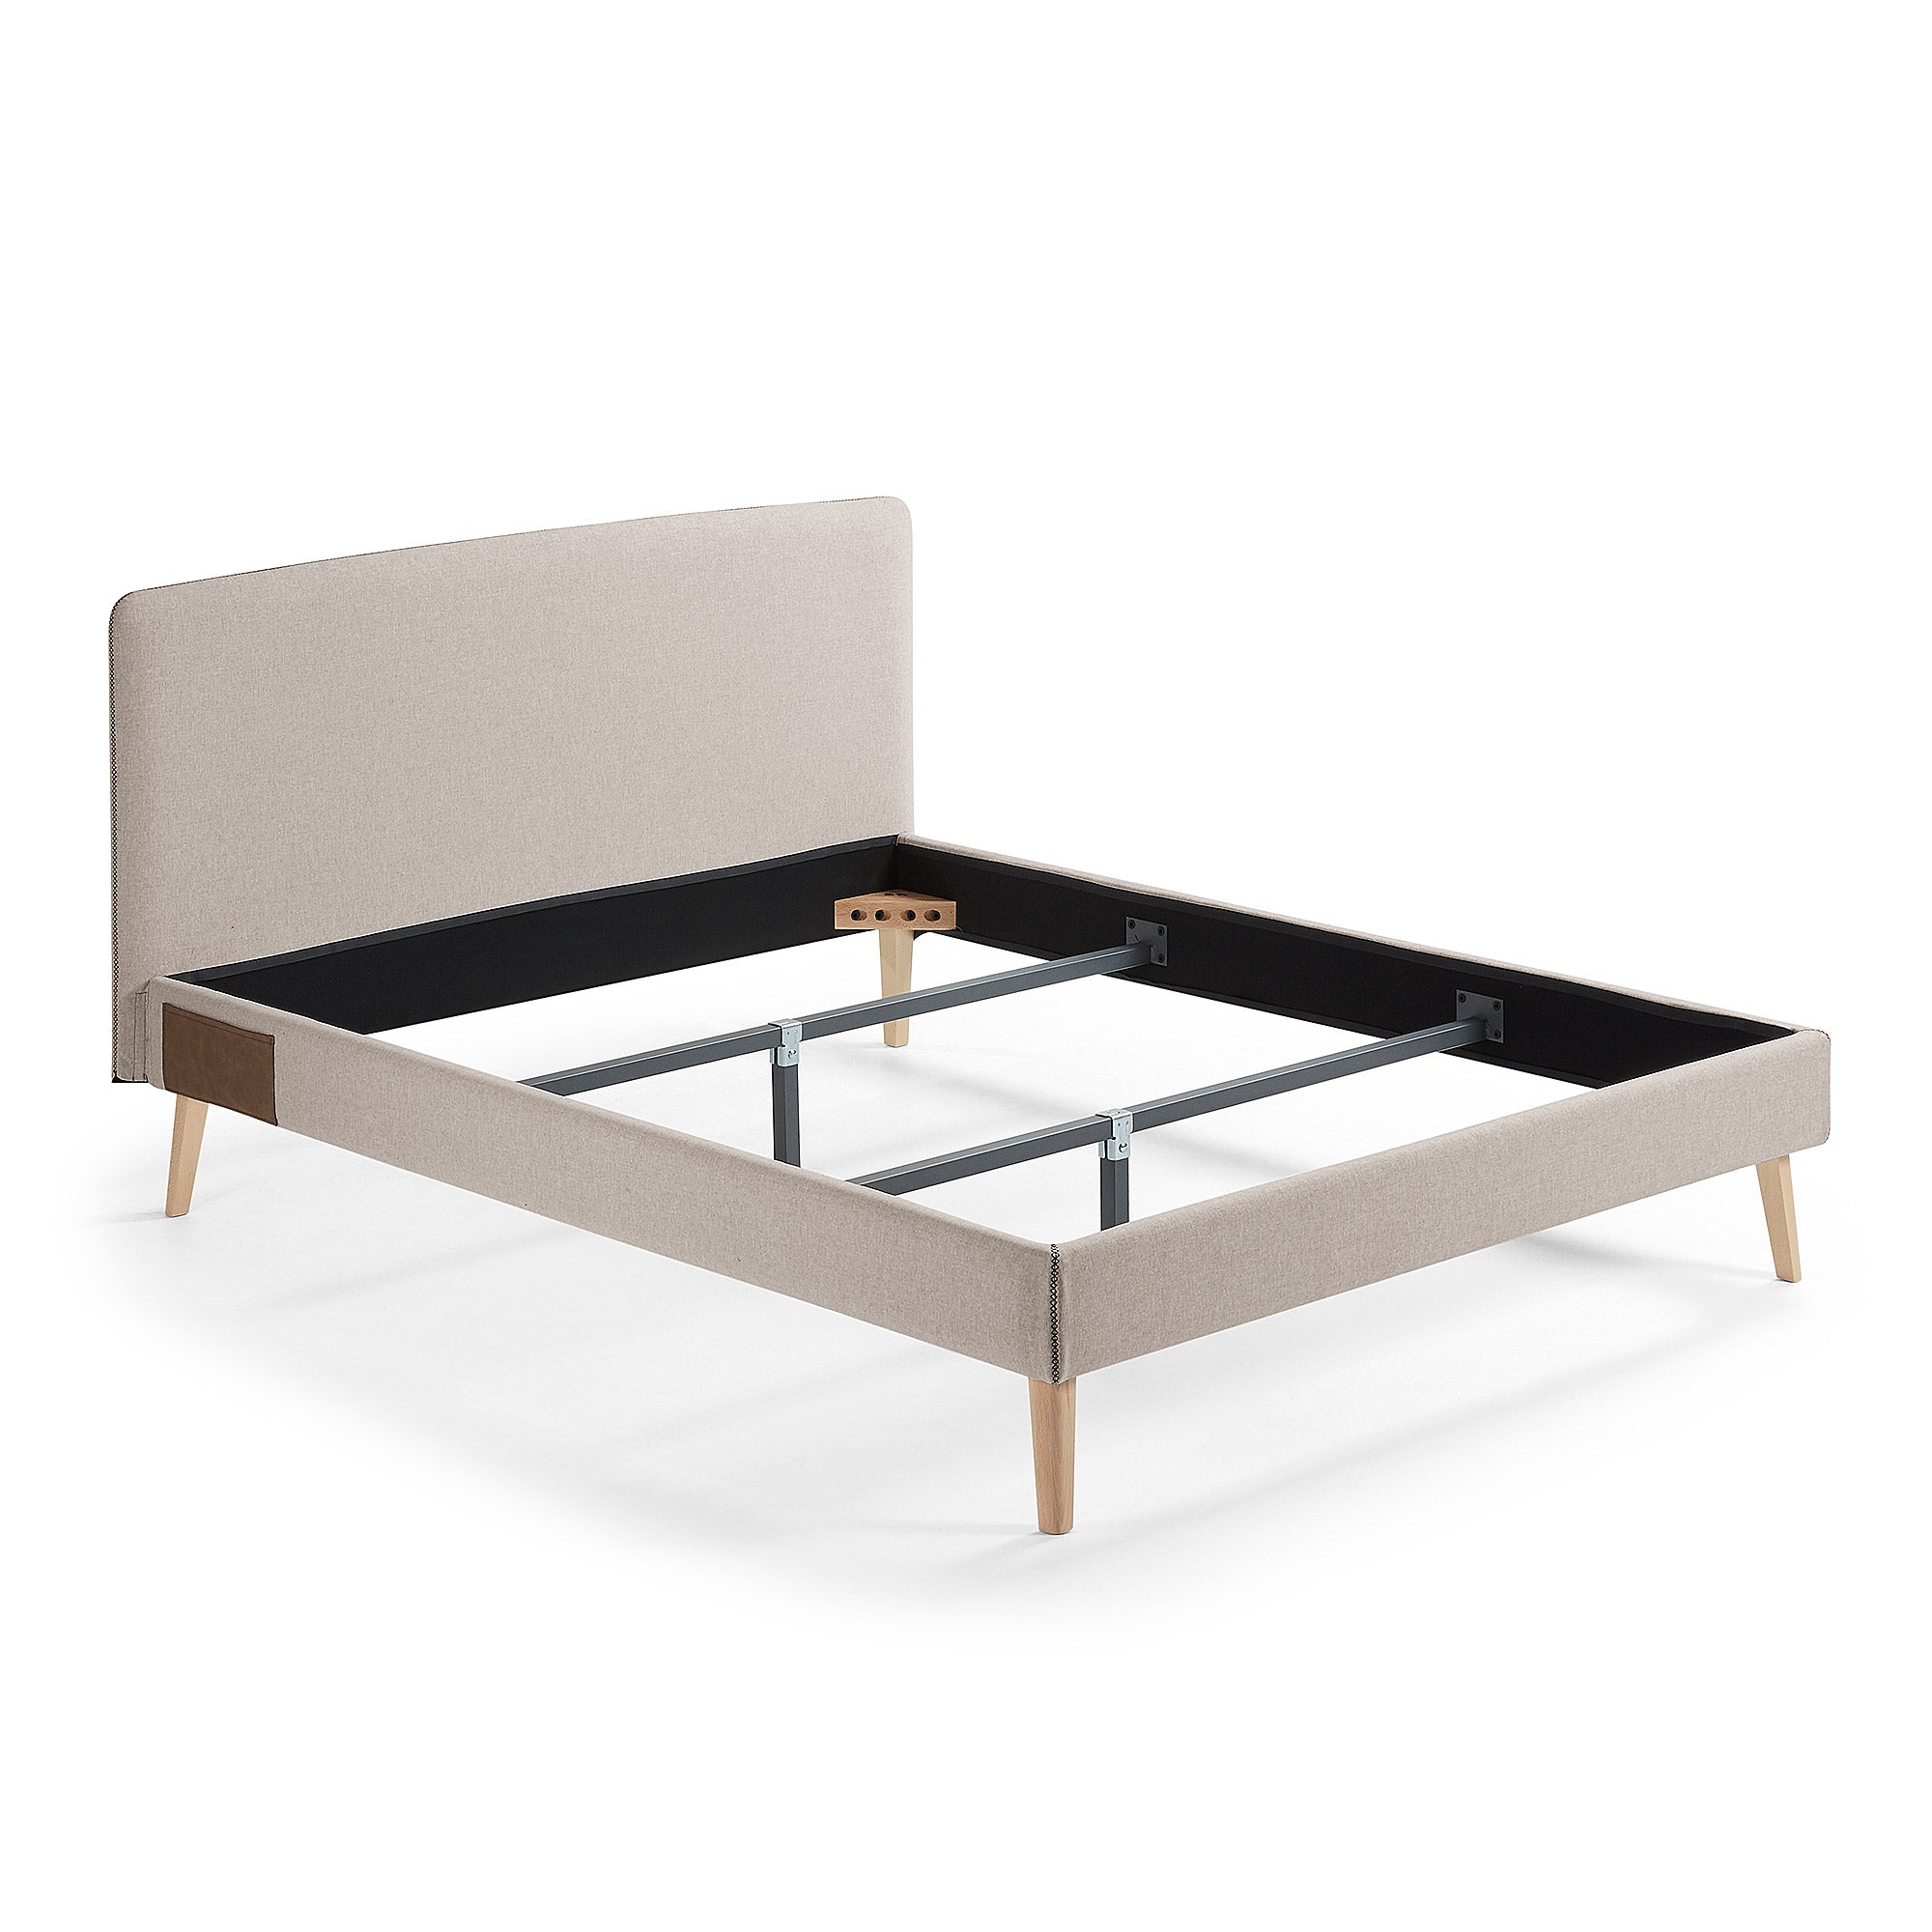 Dyla bed with removable cover in beige, with solid beech wood legs for a 150 x 190 cm mattress